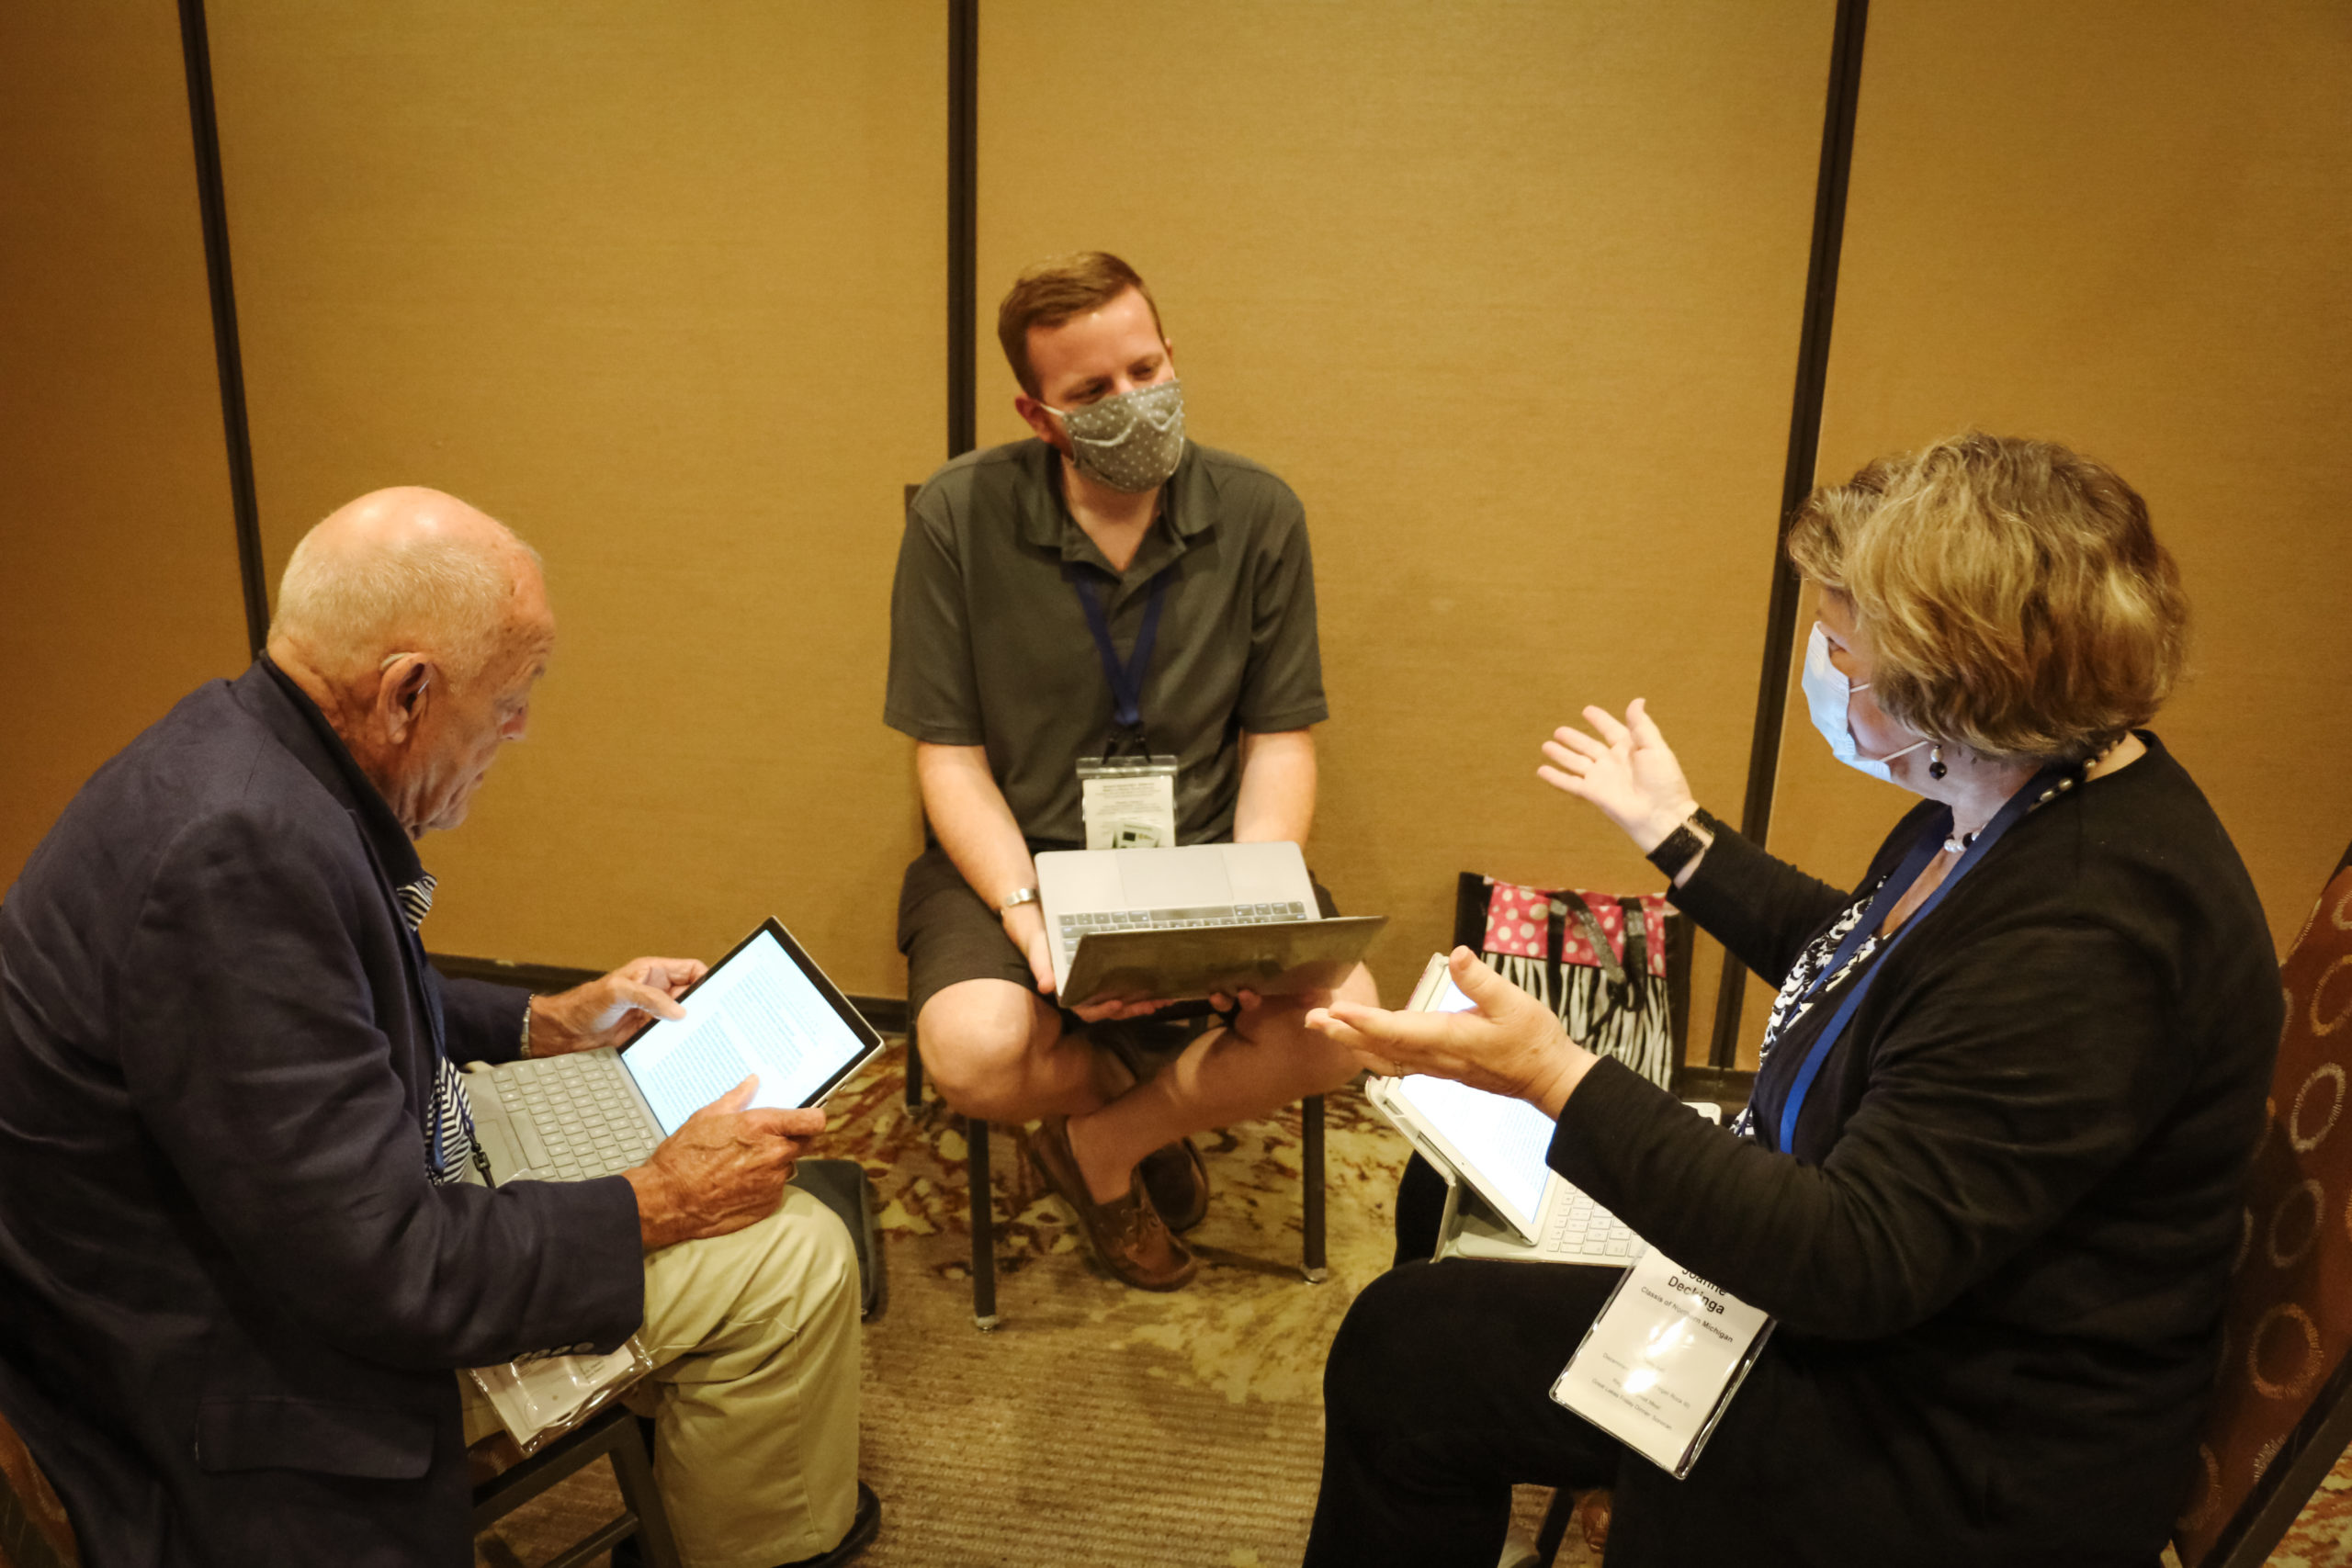 Three delegates engage in discussion during Thursday's discernment group time.